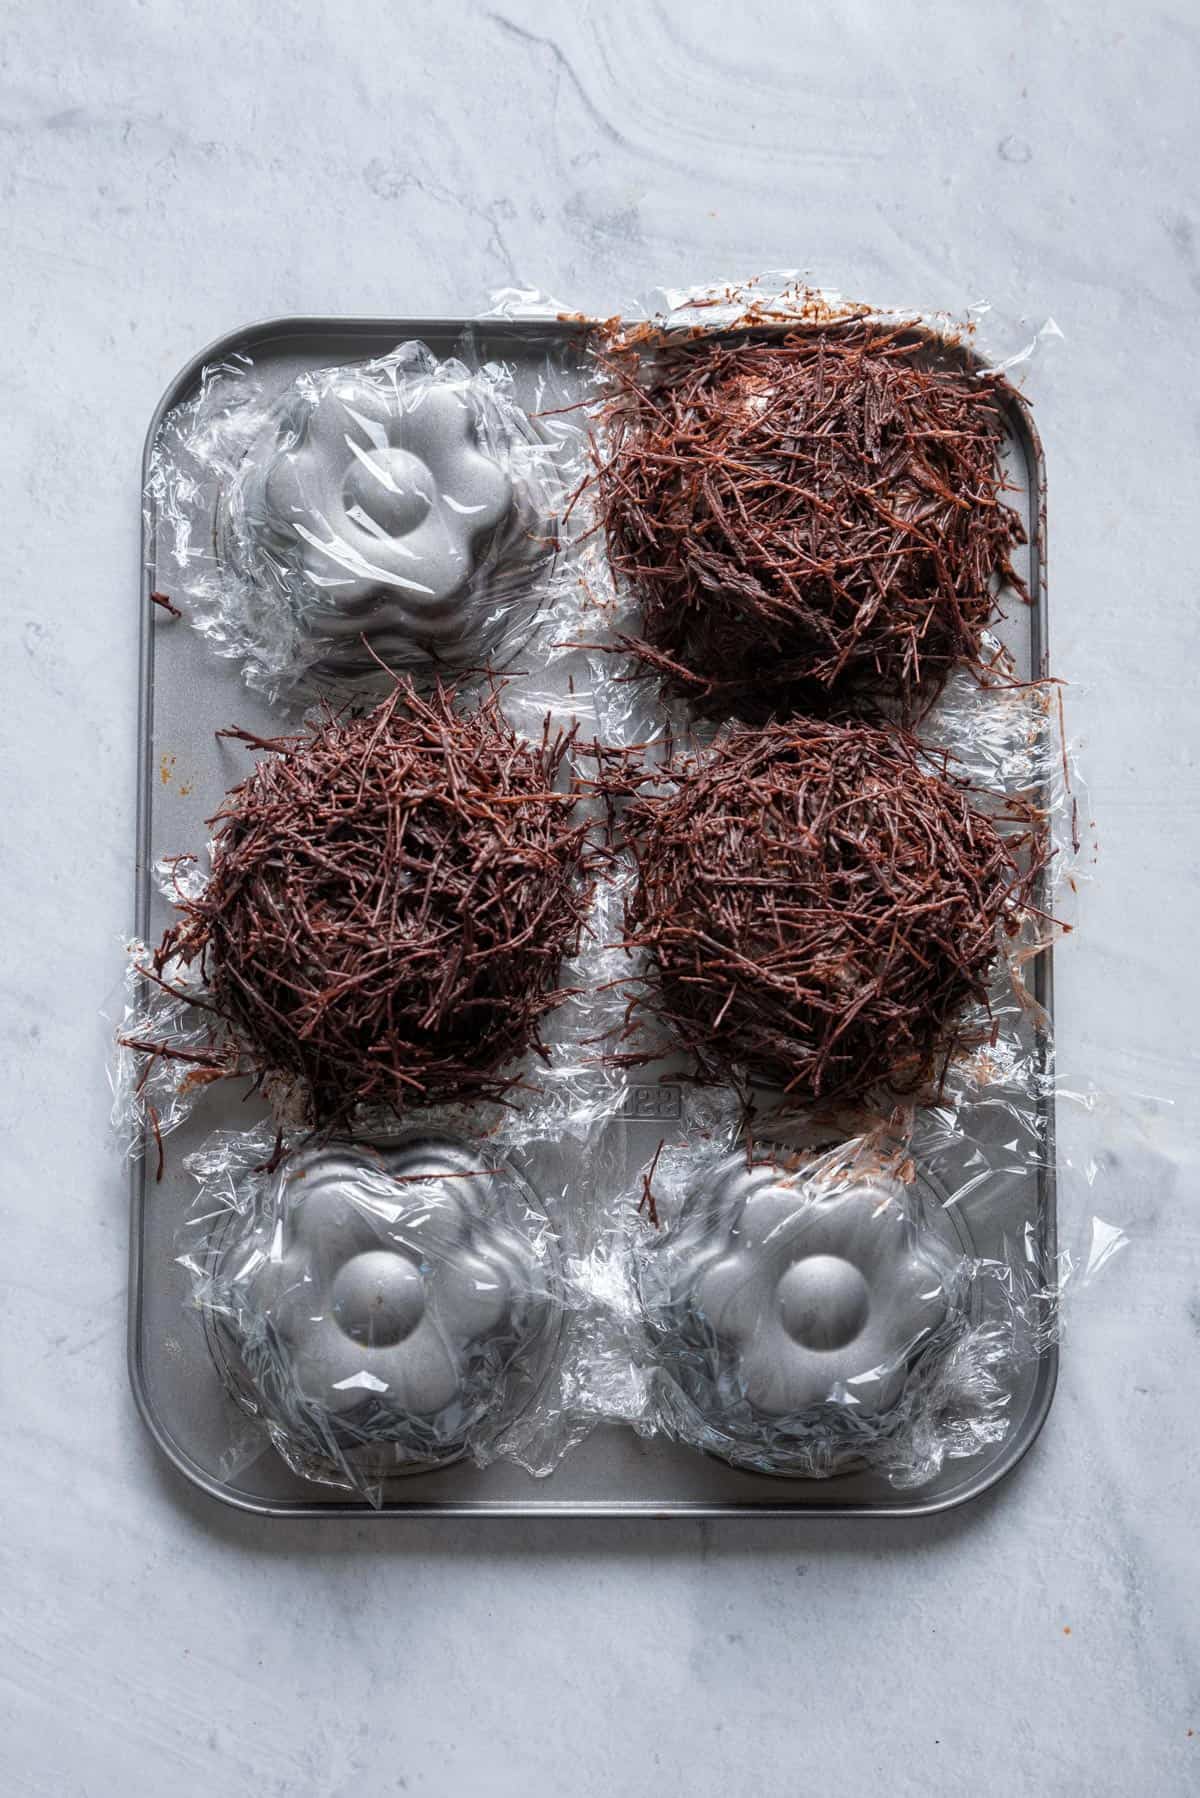 Forming the chocolate nests around the muffin tins